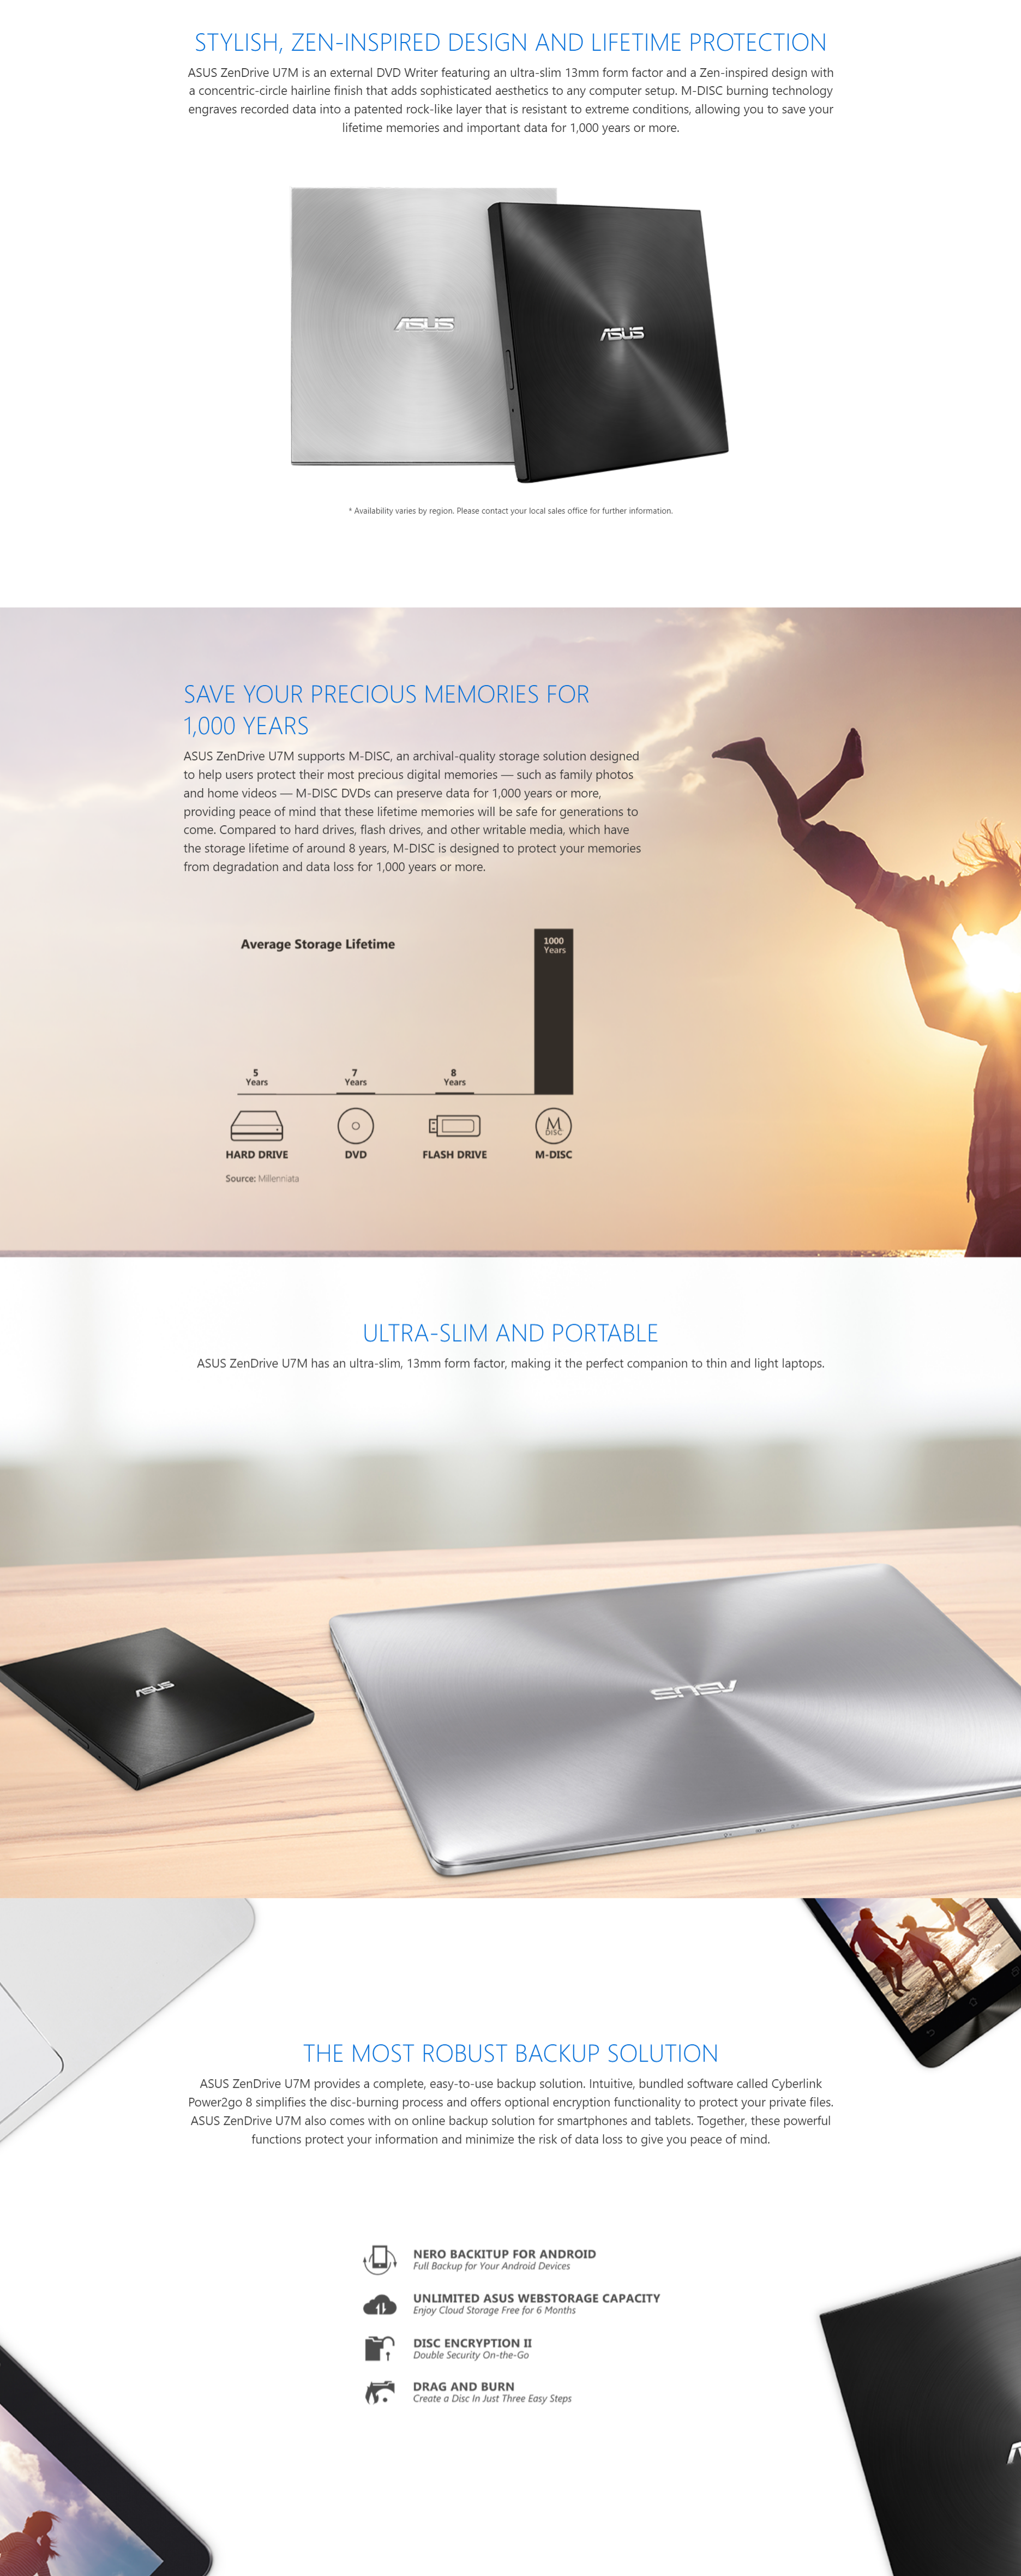 A large marketing image providing additional information about the product ASUS ZenDrive U7M External USB2.0 DVD Writer - Additional alt info not provided